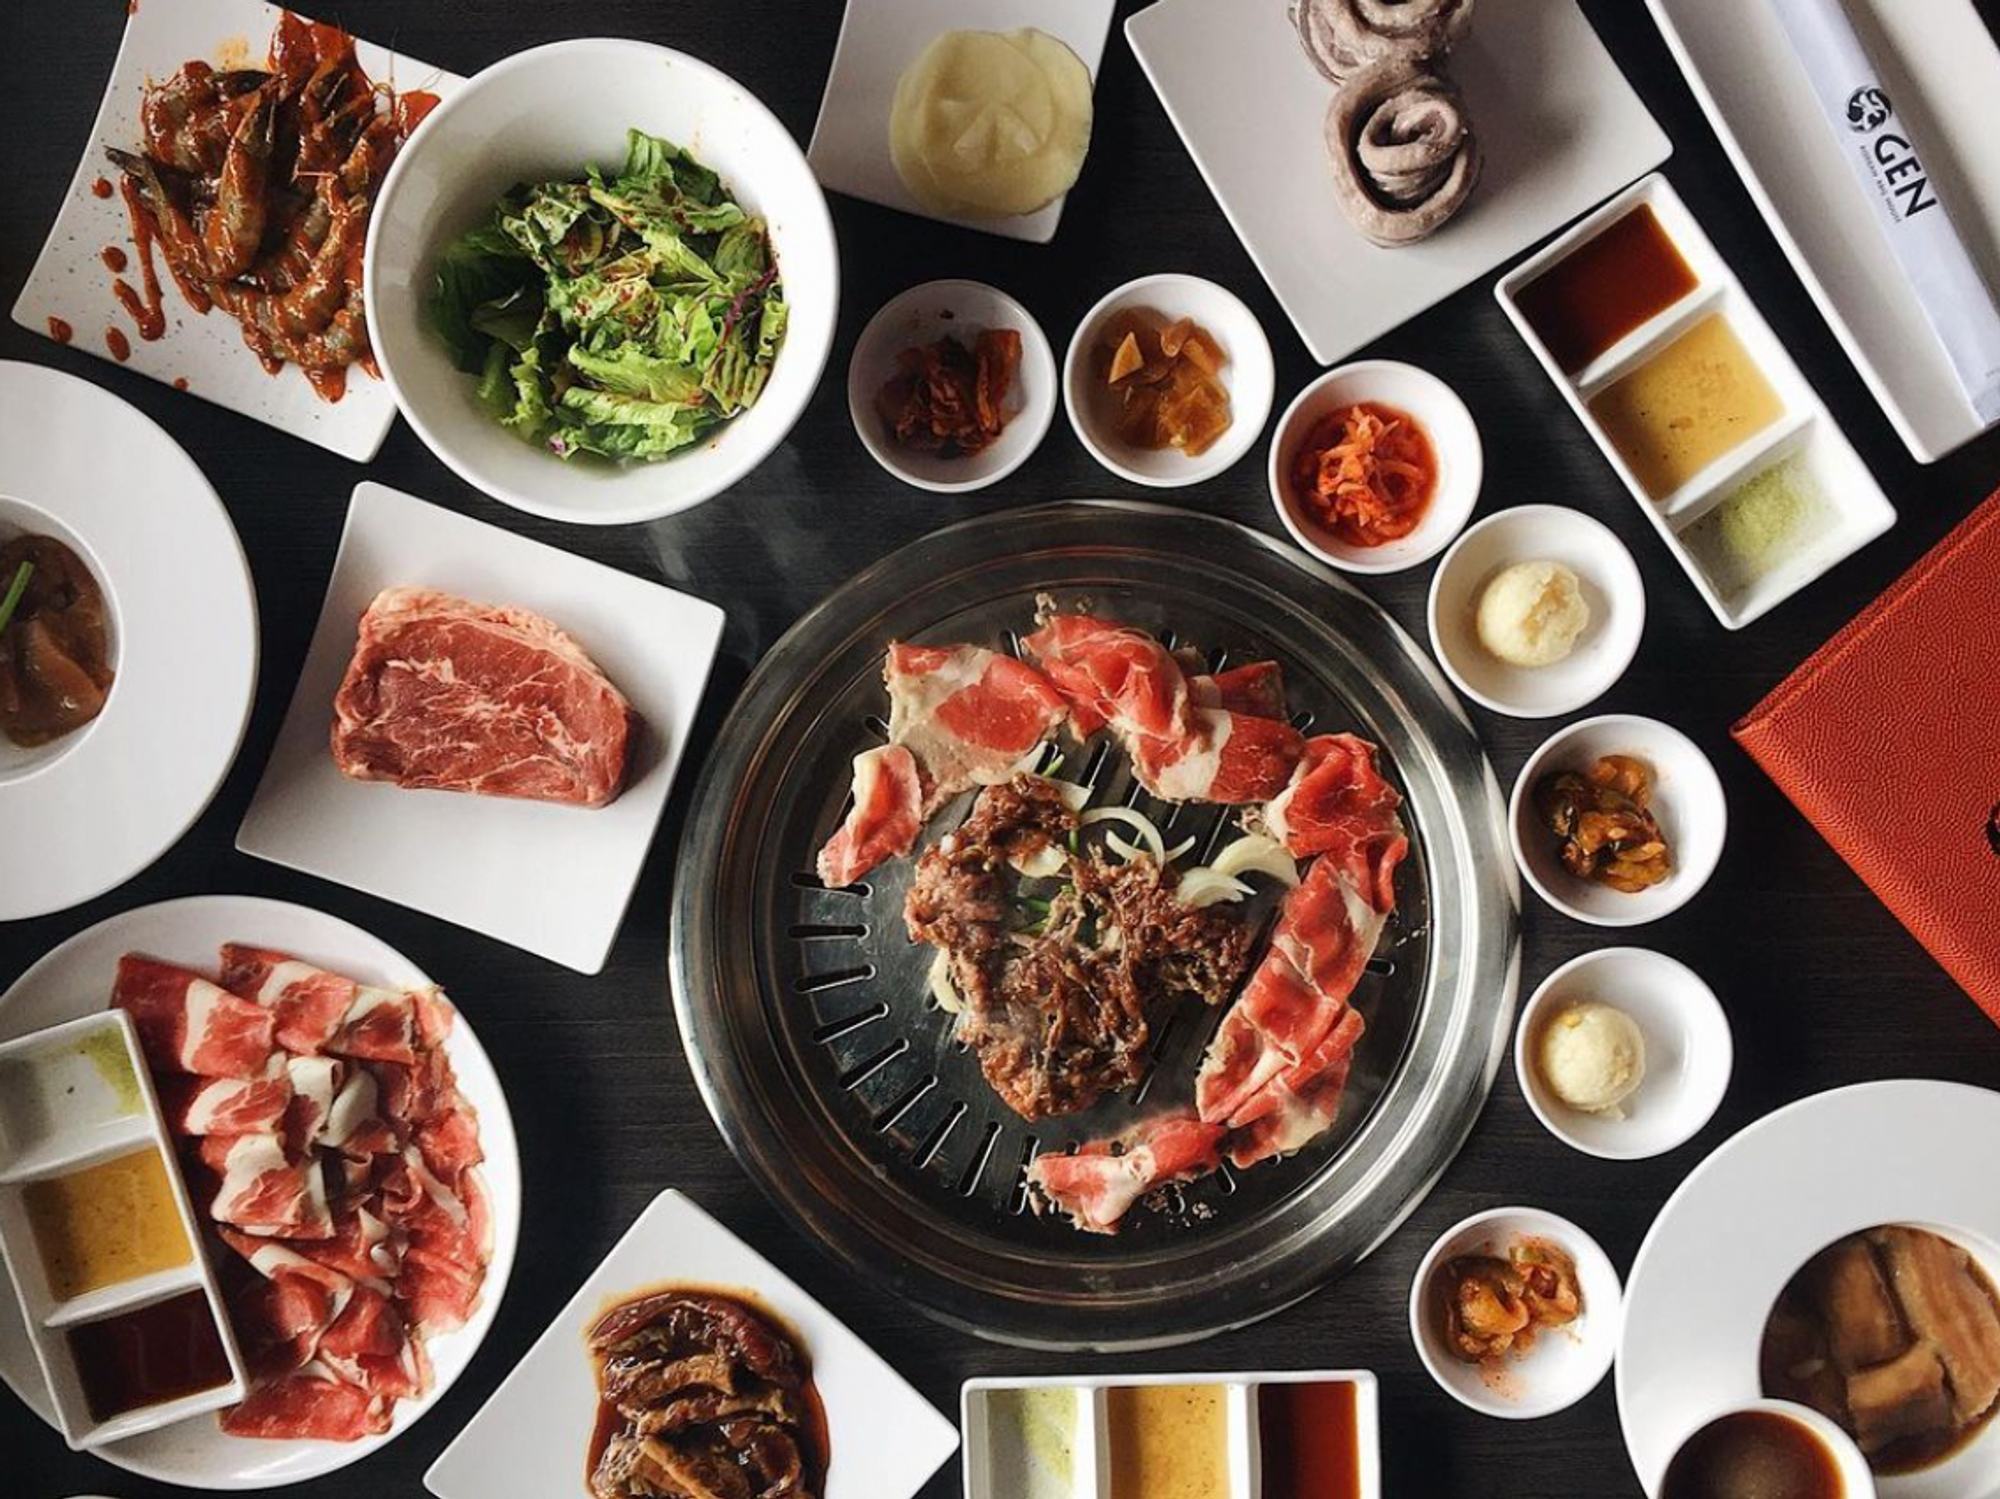 Meats and sauces by Gen Korean BBQ House